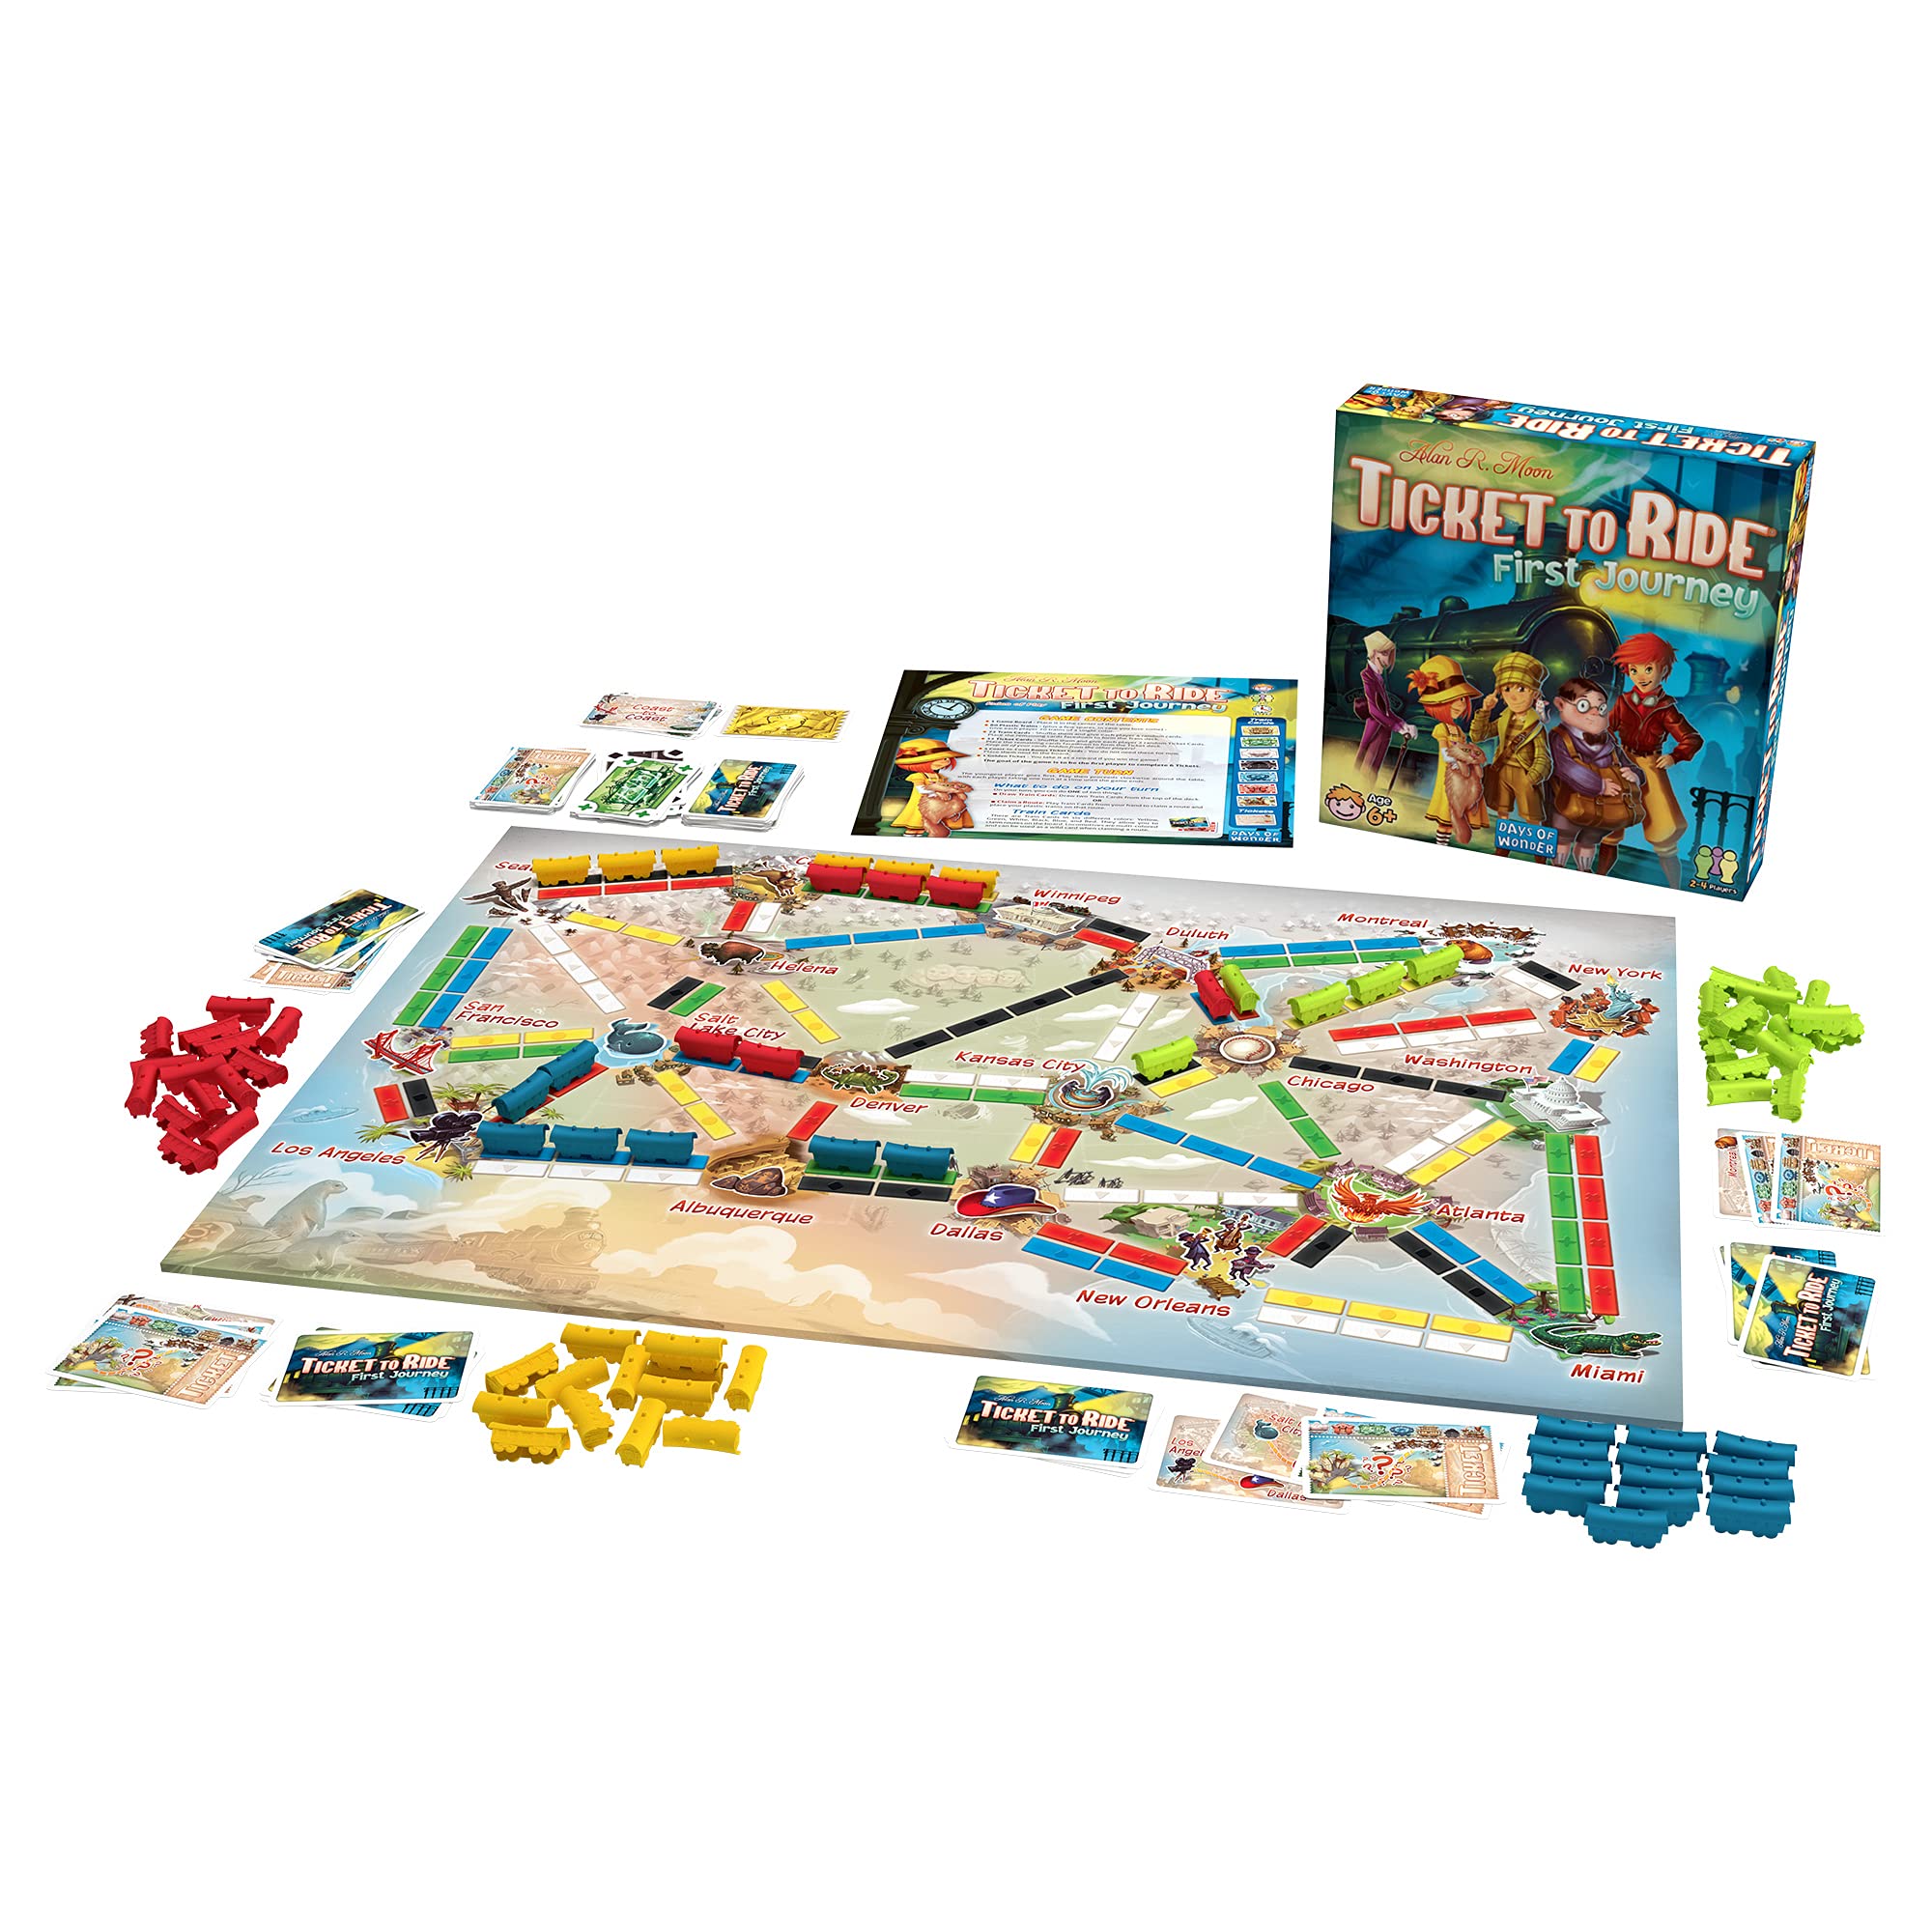 Ticket to Ride First Journey Board Game | Strategy Game | Train Adventure Game | Fun Family Game for Kids and Adults | Ages 6+ | 2-4 Players | Average Playtime 15-30 Minutes | Made by Days of Wonder